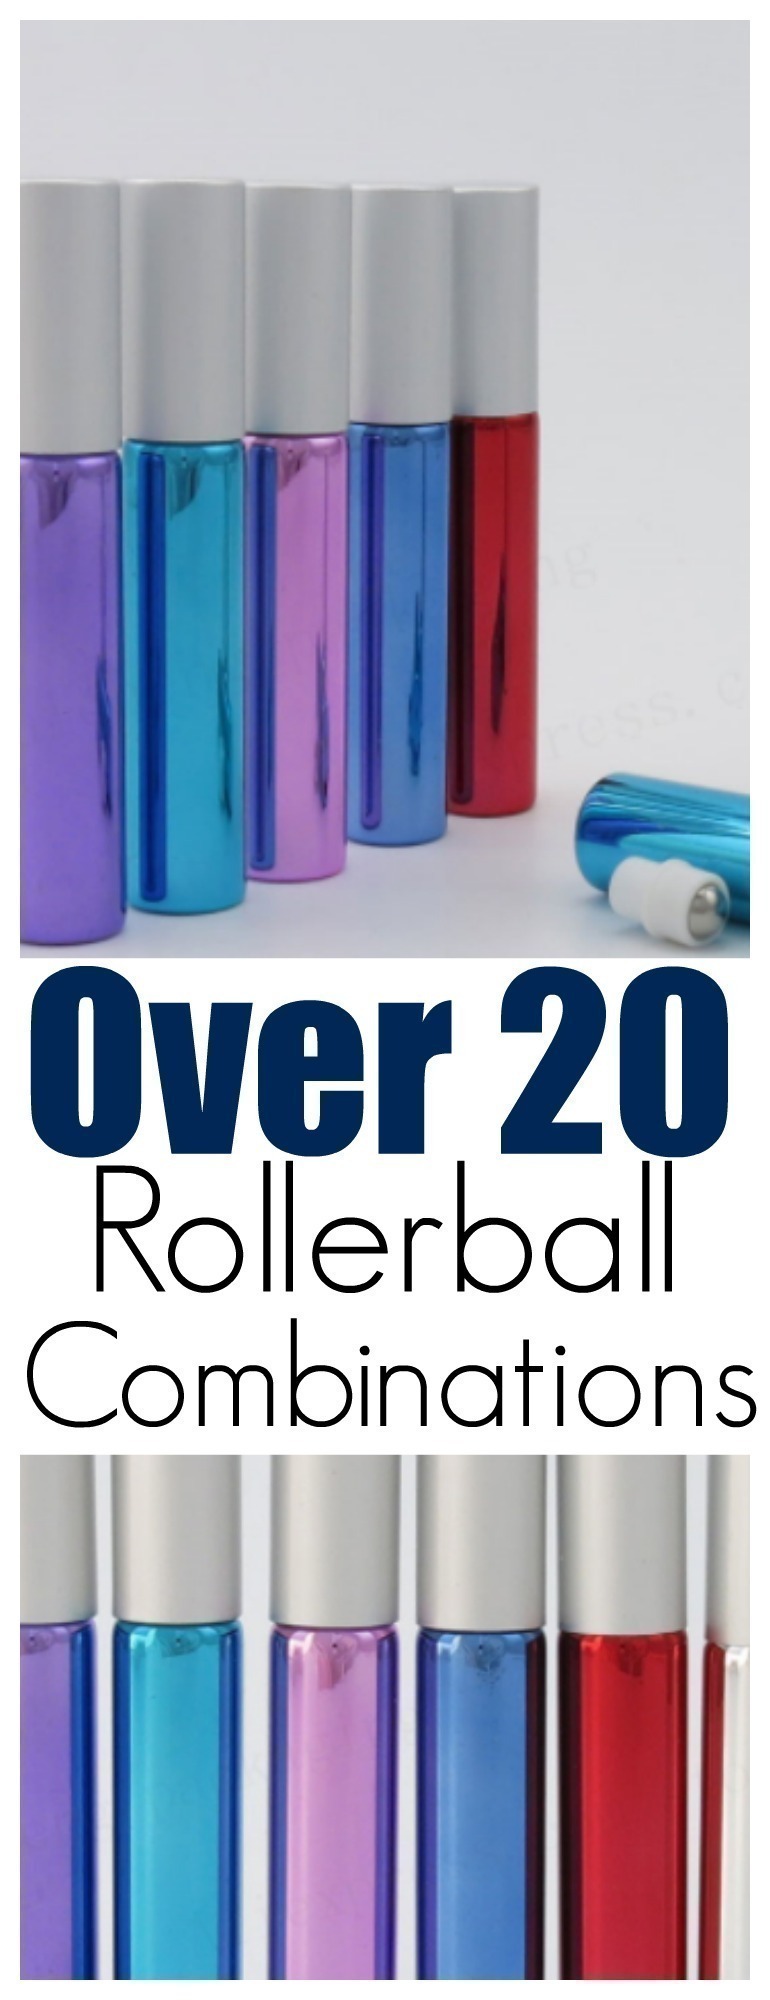 Tired? Need a pick me up? Have a hard time focusing? Essential Oils can help!  We have over 20 Rollerball Combinations that you can put together to help your problems.